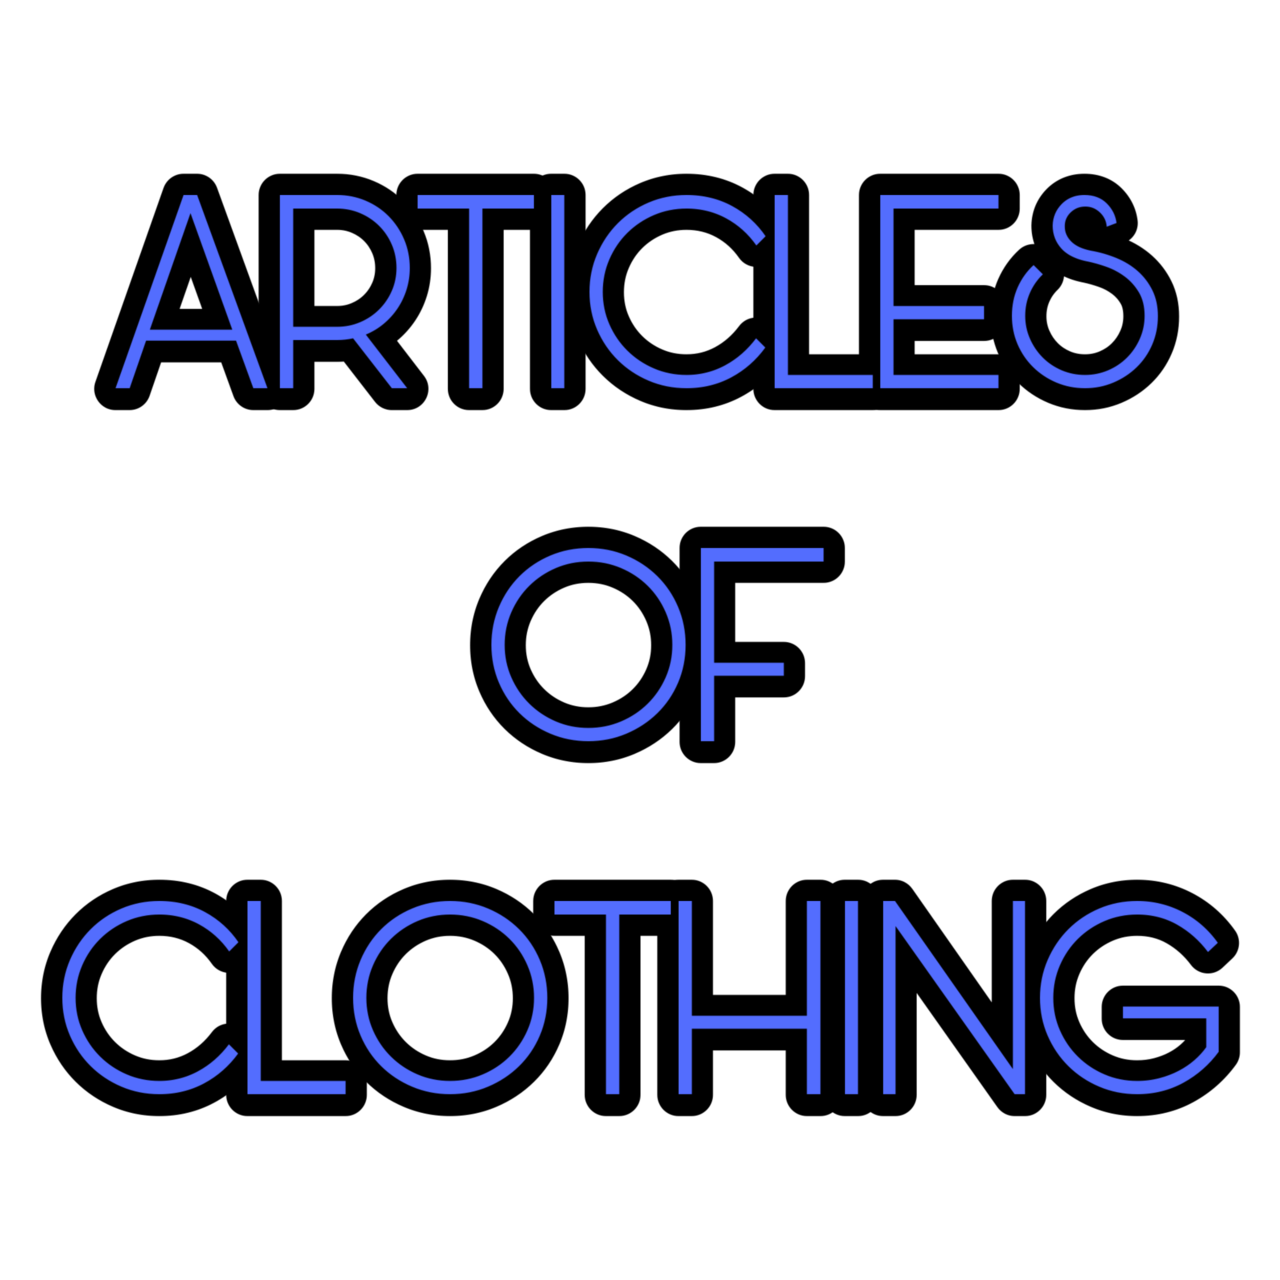 Artwork for Articles of Clothing